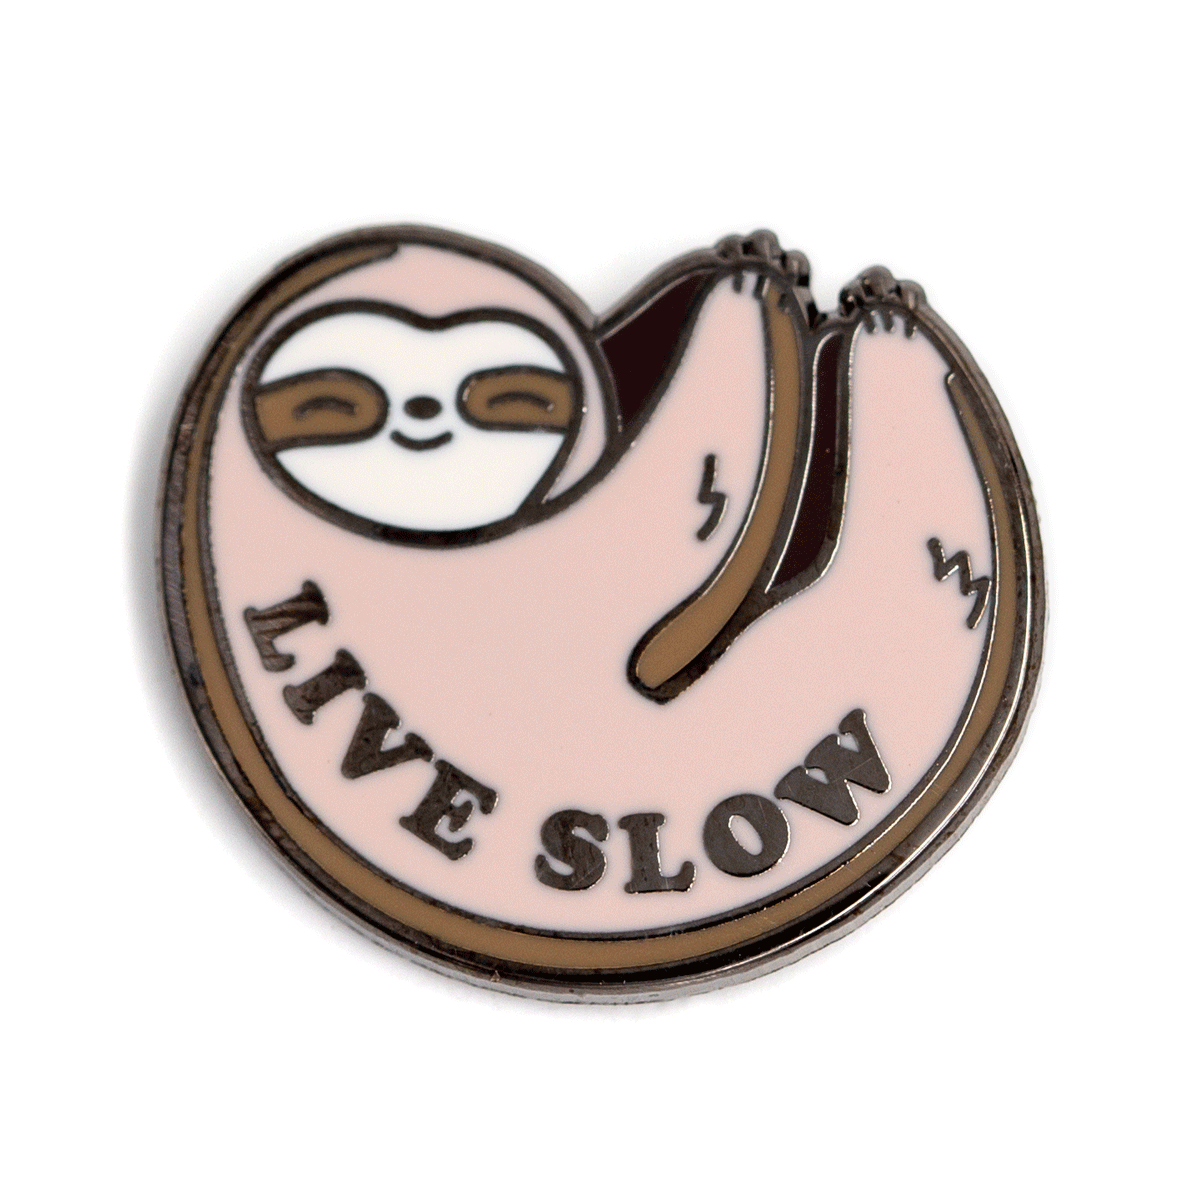 These Are Things - Live Slow Sloth Enamel Pin